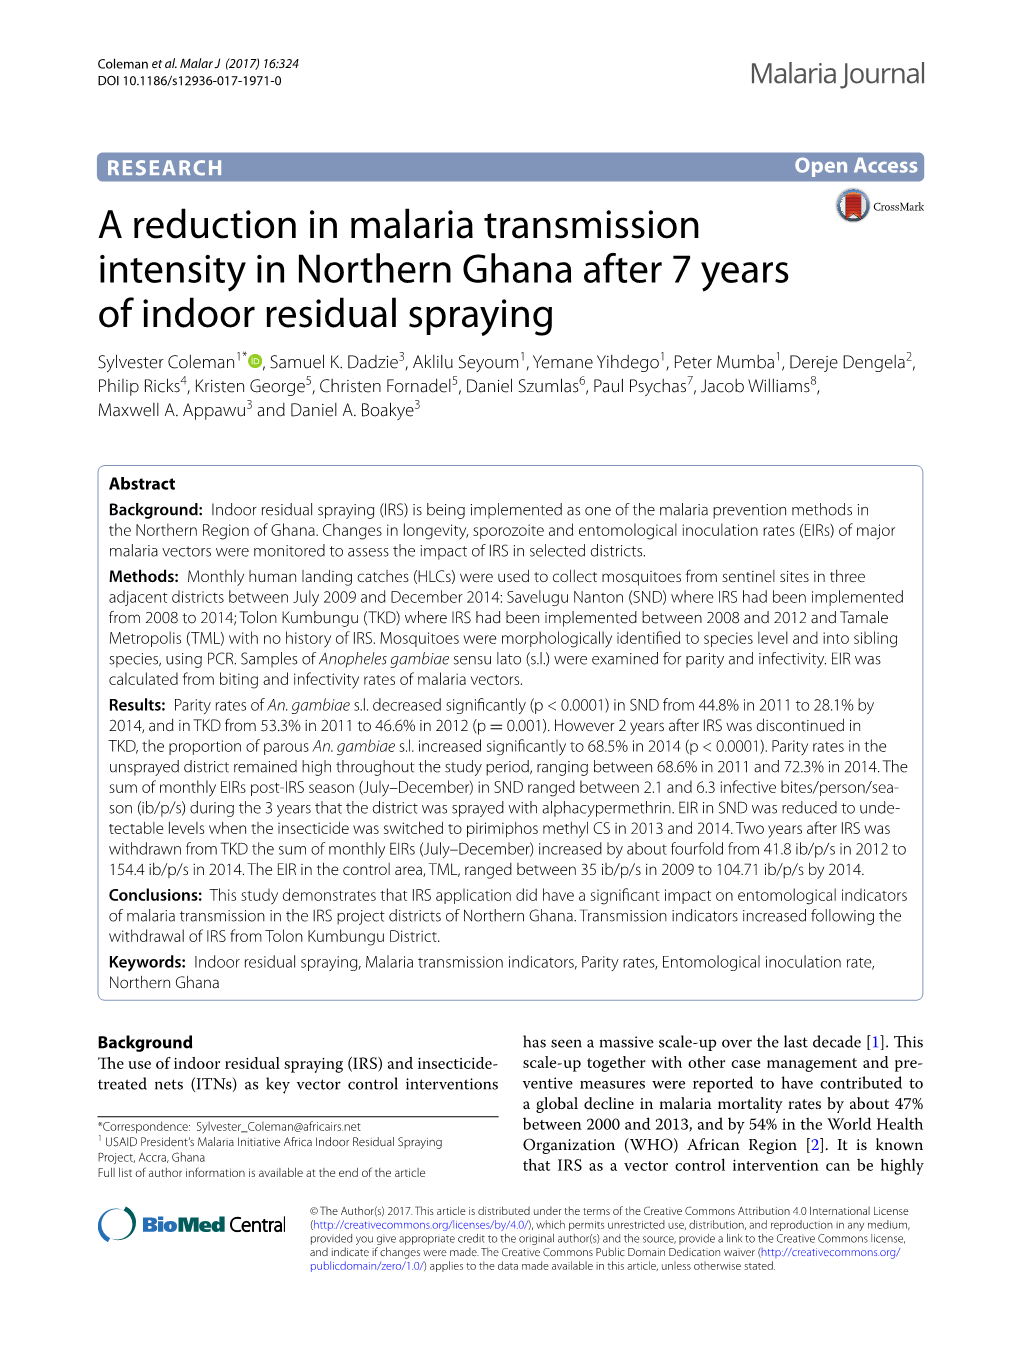 A Reduction in Malaria Transmission Intensity in Northern Ghana After 7 Years of Indoor Residual Spraying Sylvester Coleman1* , Samuel K